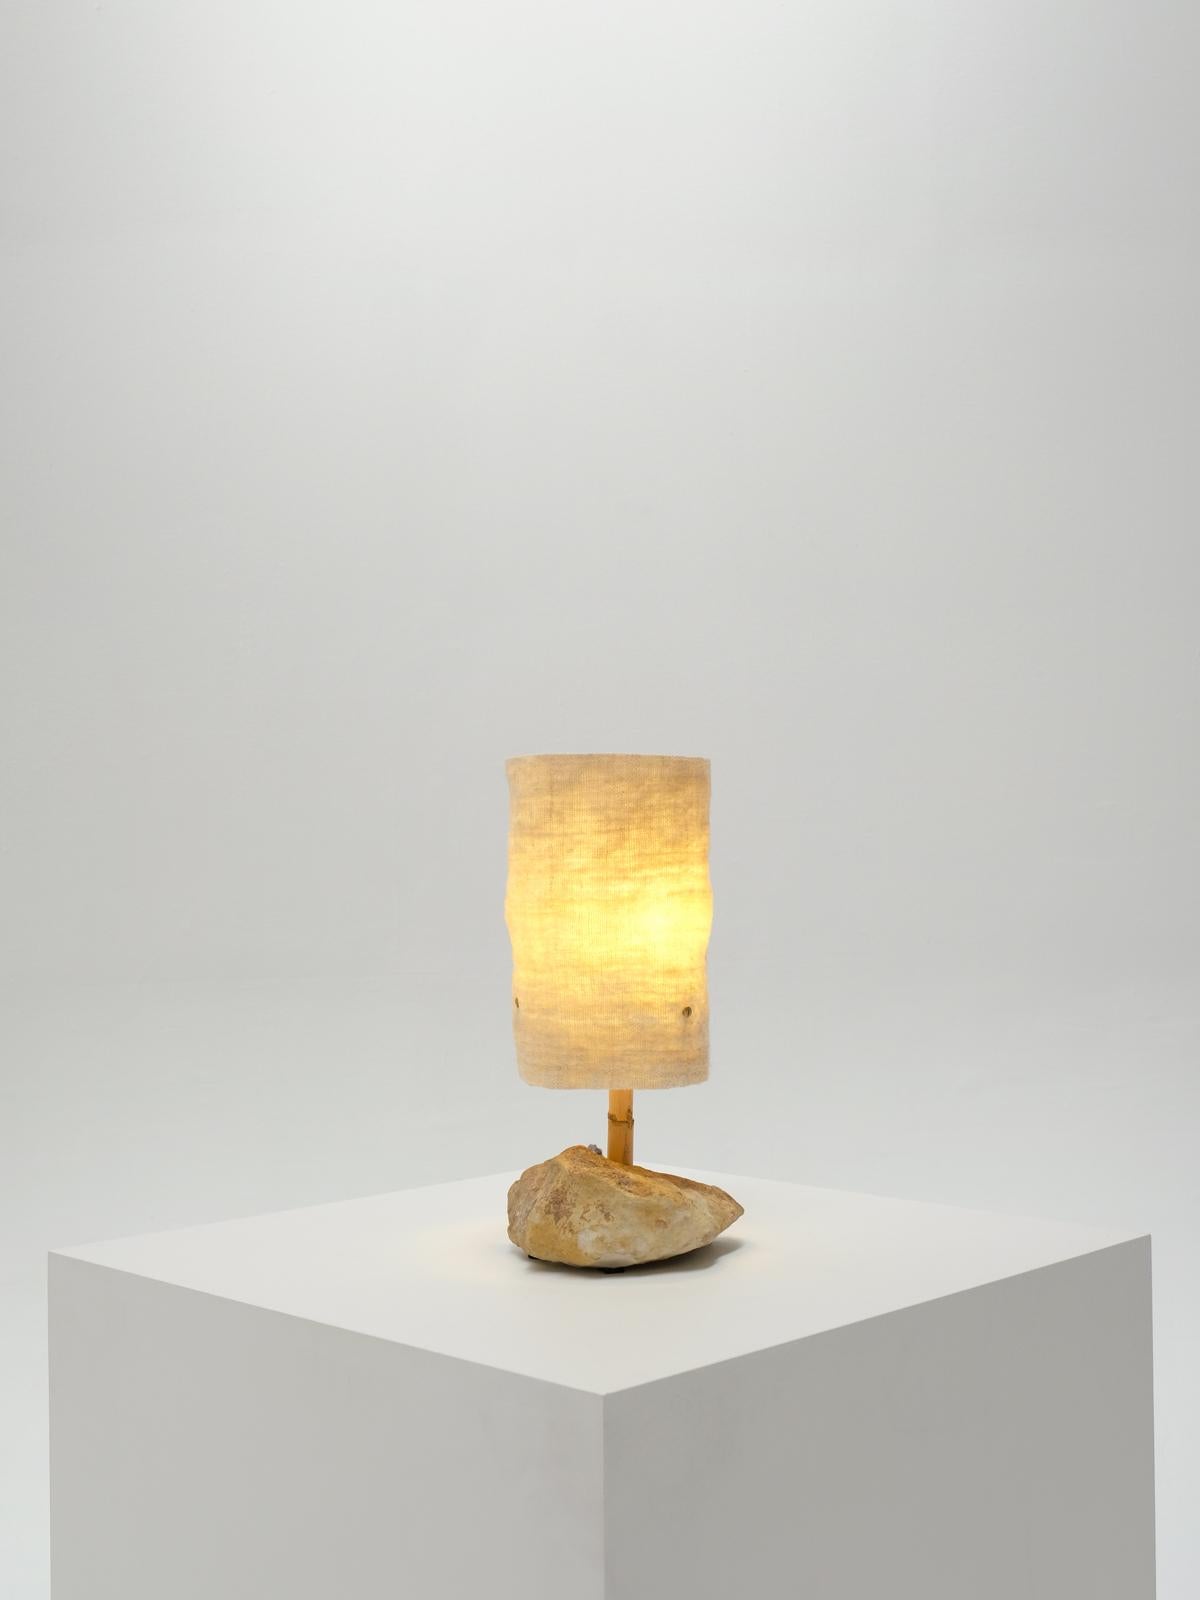 Hand-Woven Hjra Table Lamp Small, Handspun, Handwoven wool Lampshade, Made of Rock & Reed For Sale